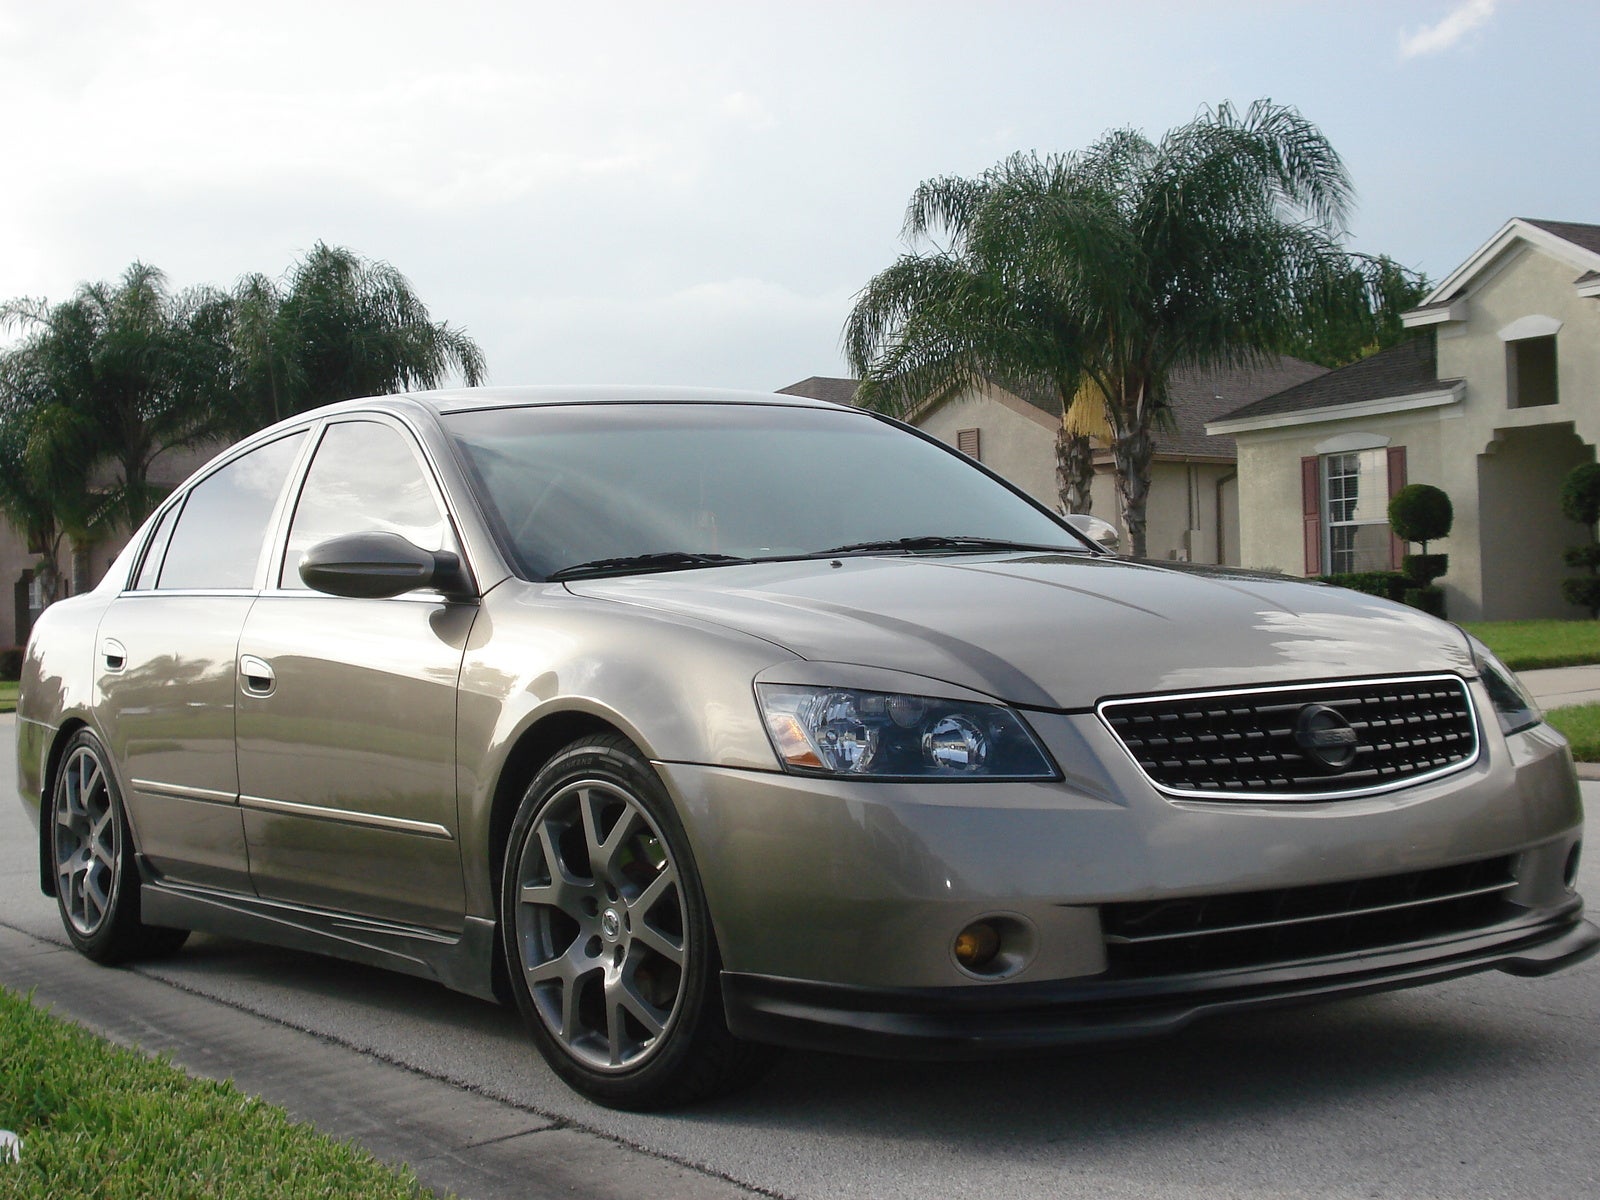 2007 Nissan Altima 3.5 SE - Pictures - Picture of 2007 Nissan Altima ...